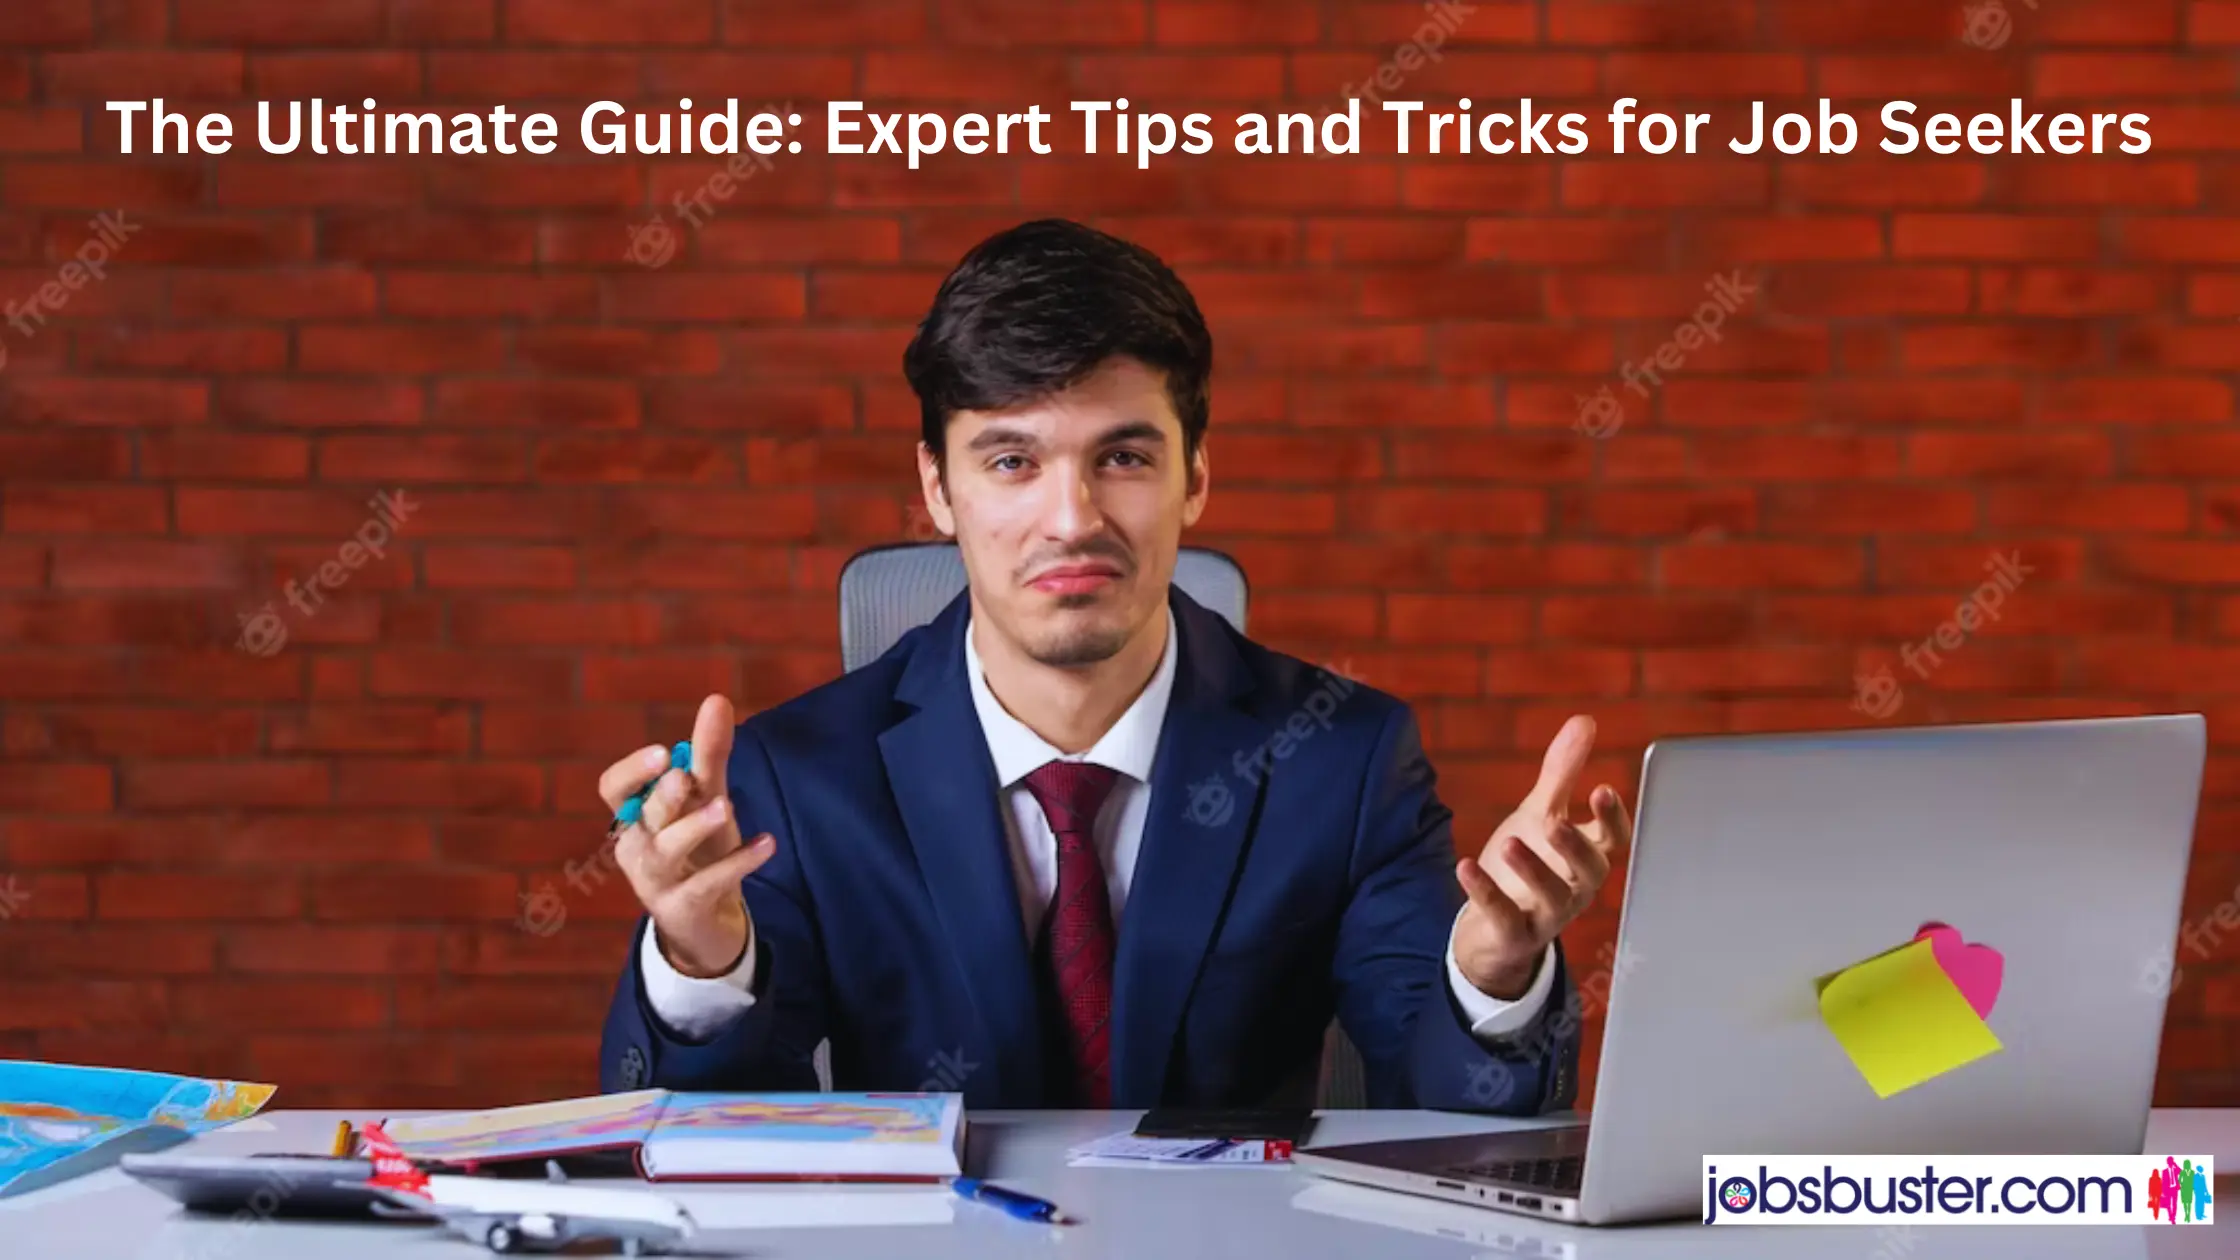 The Ultimate Guide: Expert Tips and Tricks for Job Seekers